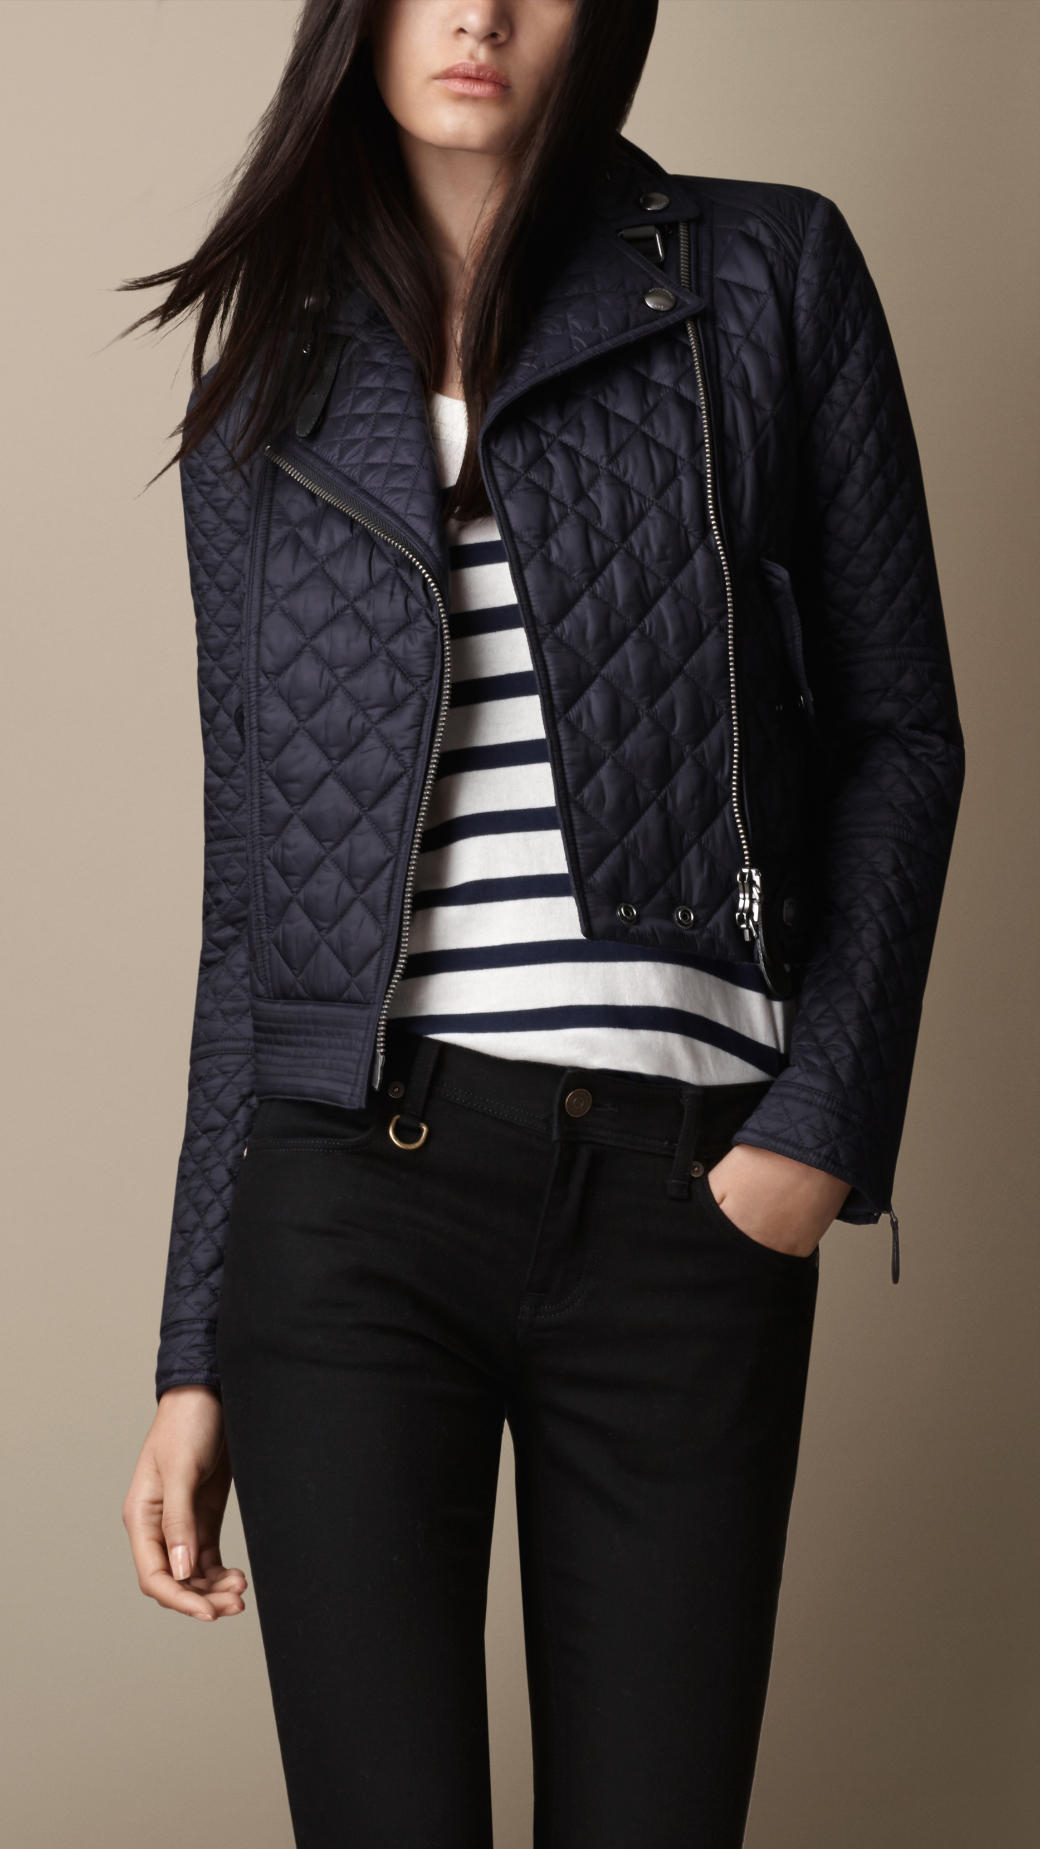 Lyst - Burberry Diamond Quilted Biker Jacket in Blue